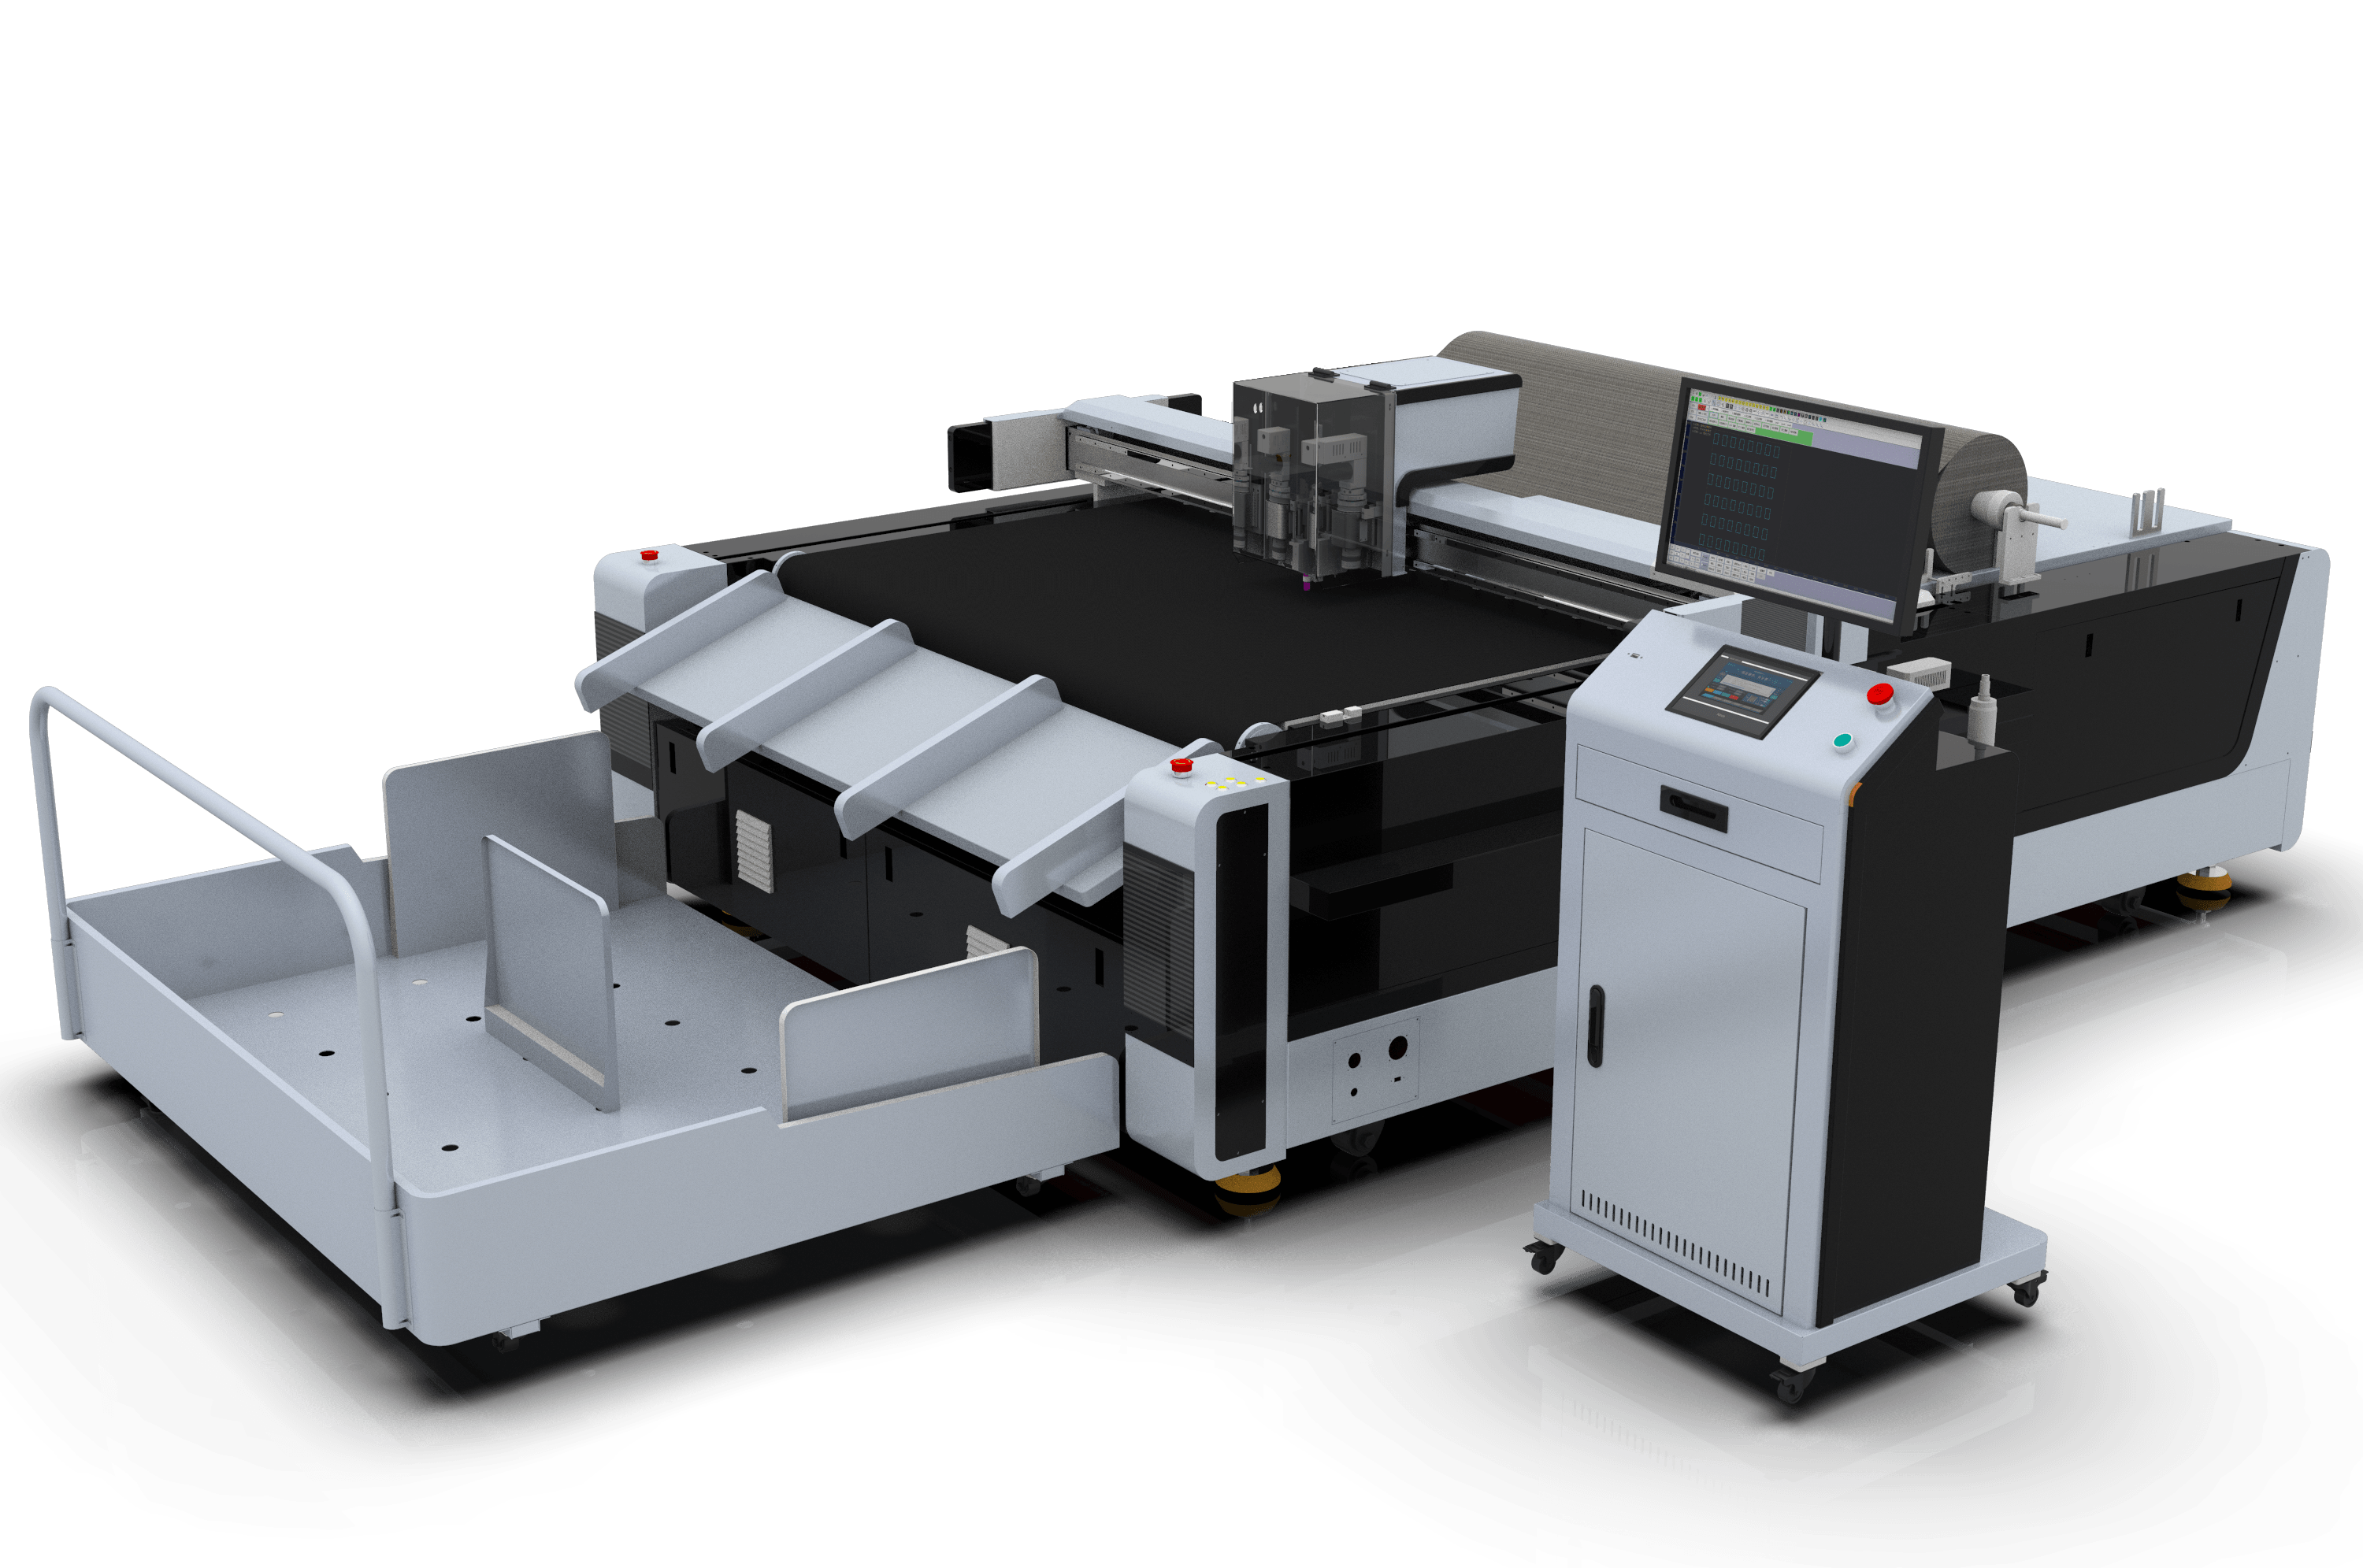 How much do you know about the label industry? How to use label cutting machine to cut efficiently?